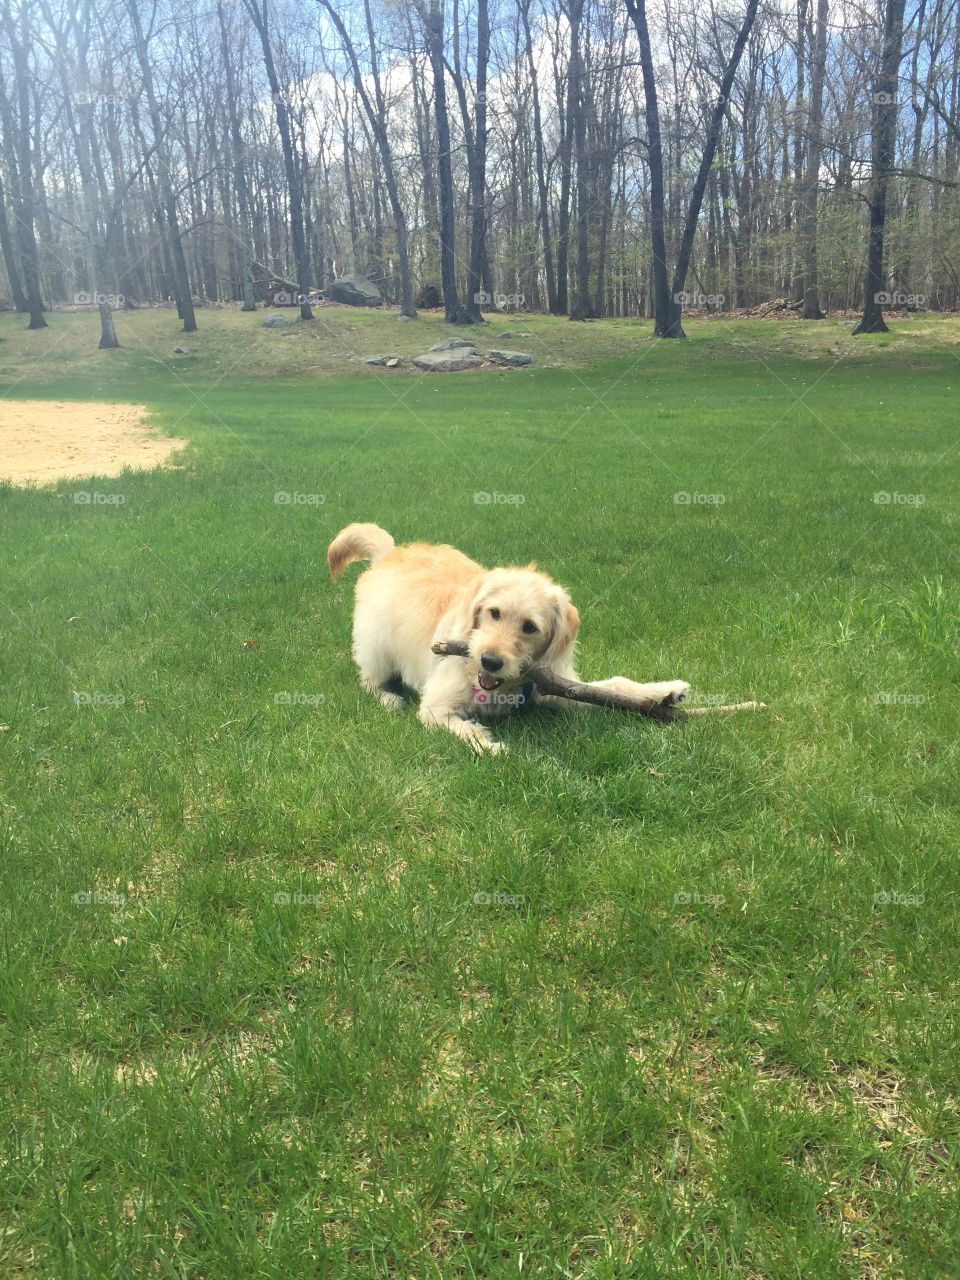 Dog with a stick in springtime green grass.